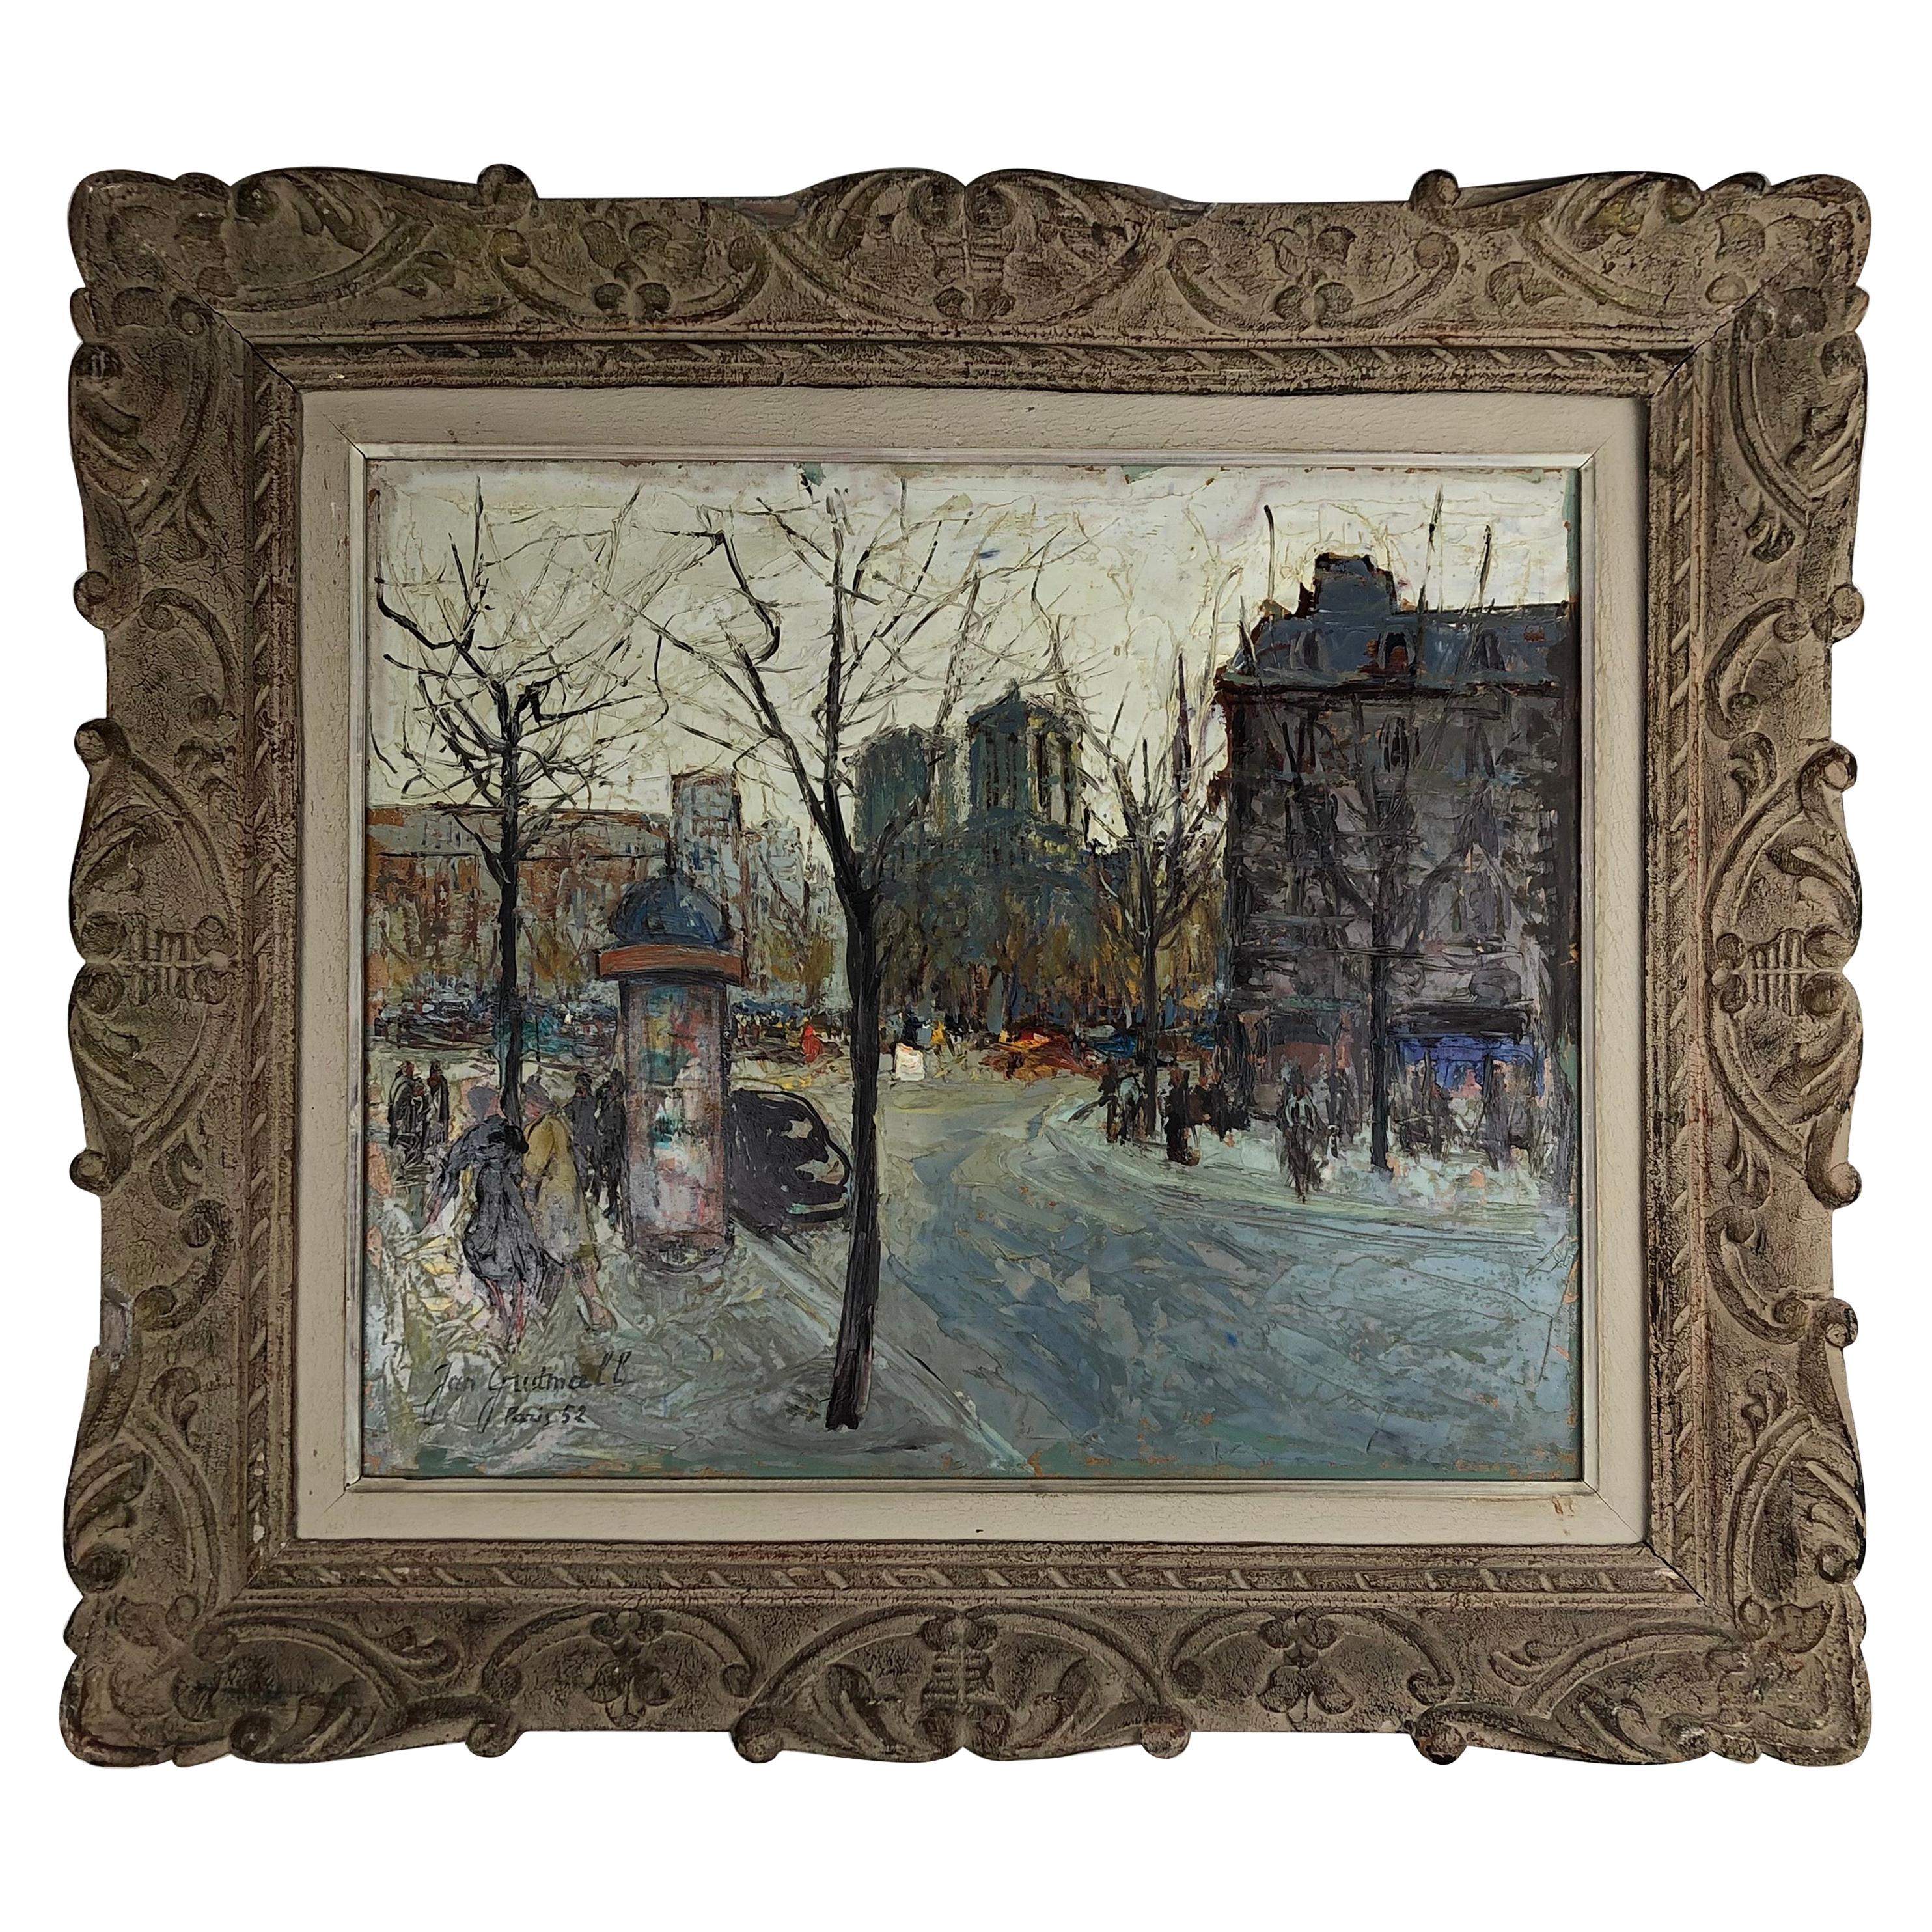 Paris France Cityscape Oil Painting by Jan Gridmall, Signed and Dated 1952